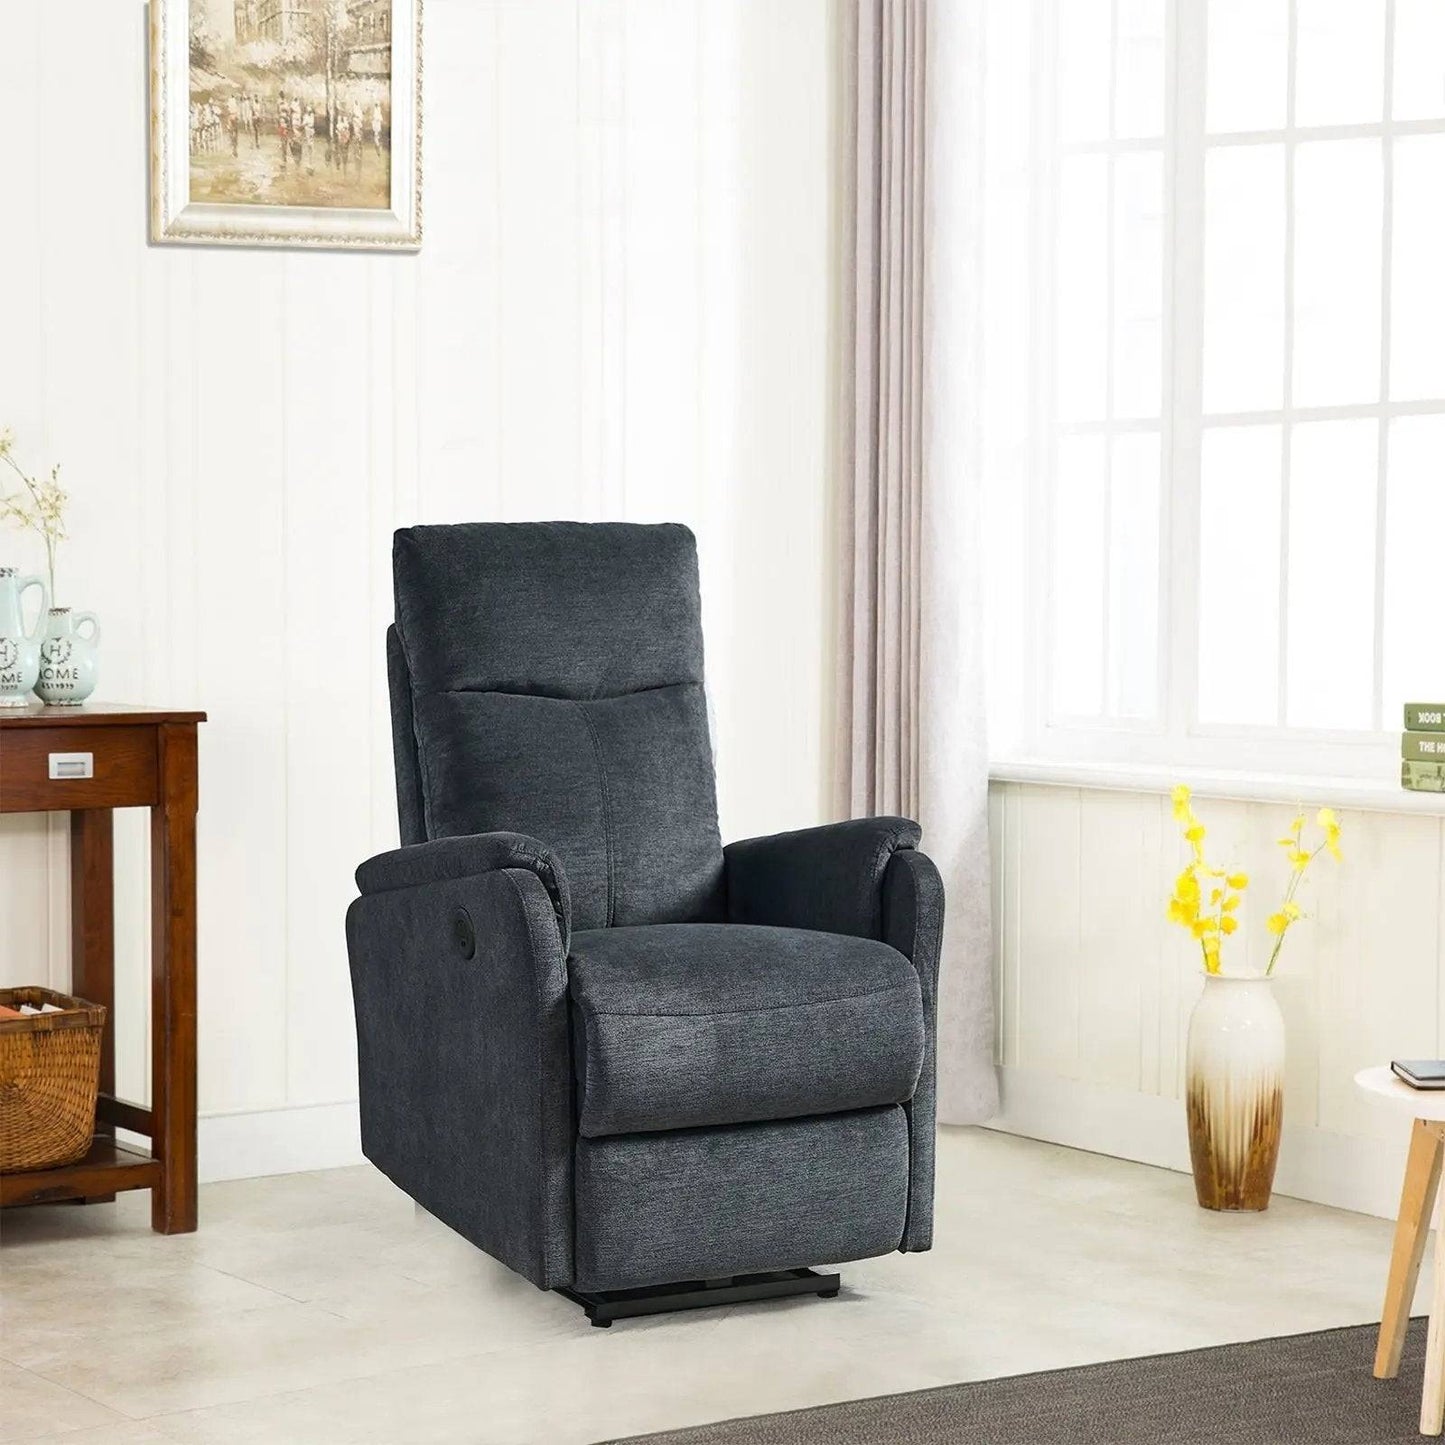 Recliner Chair With Recliner Chair easy control big stocks , Recliner Single Chair For Living Room , Bed Room